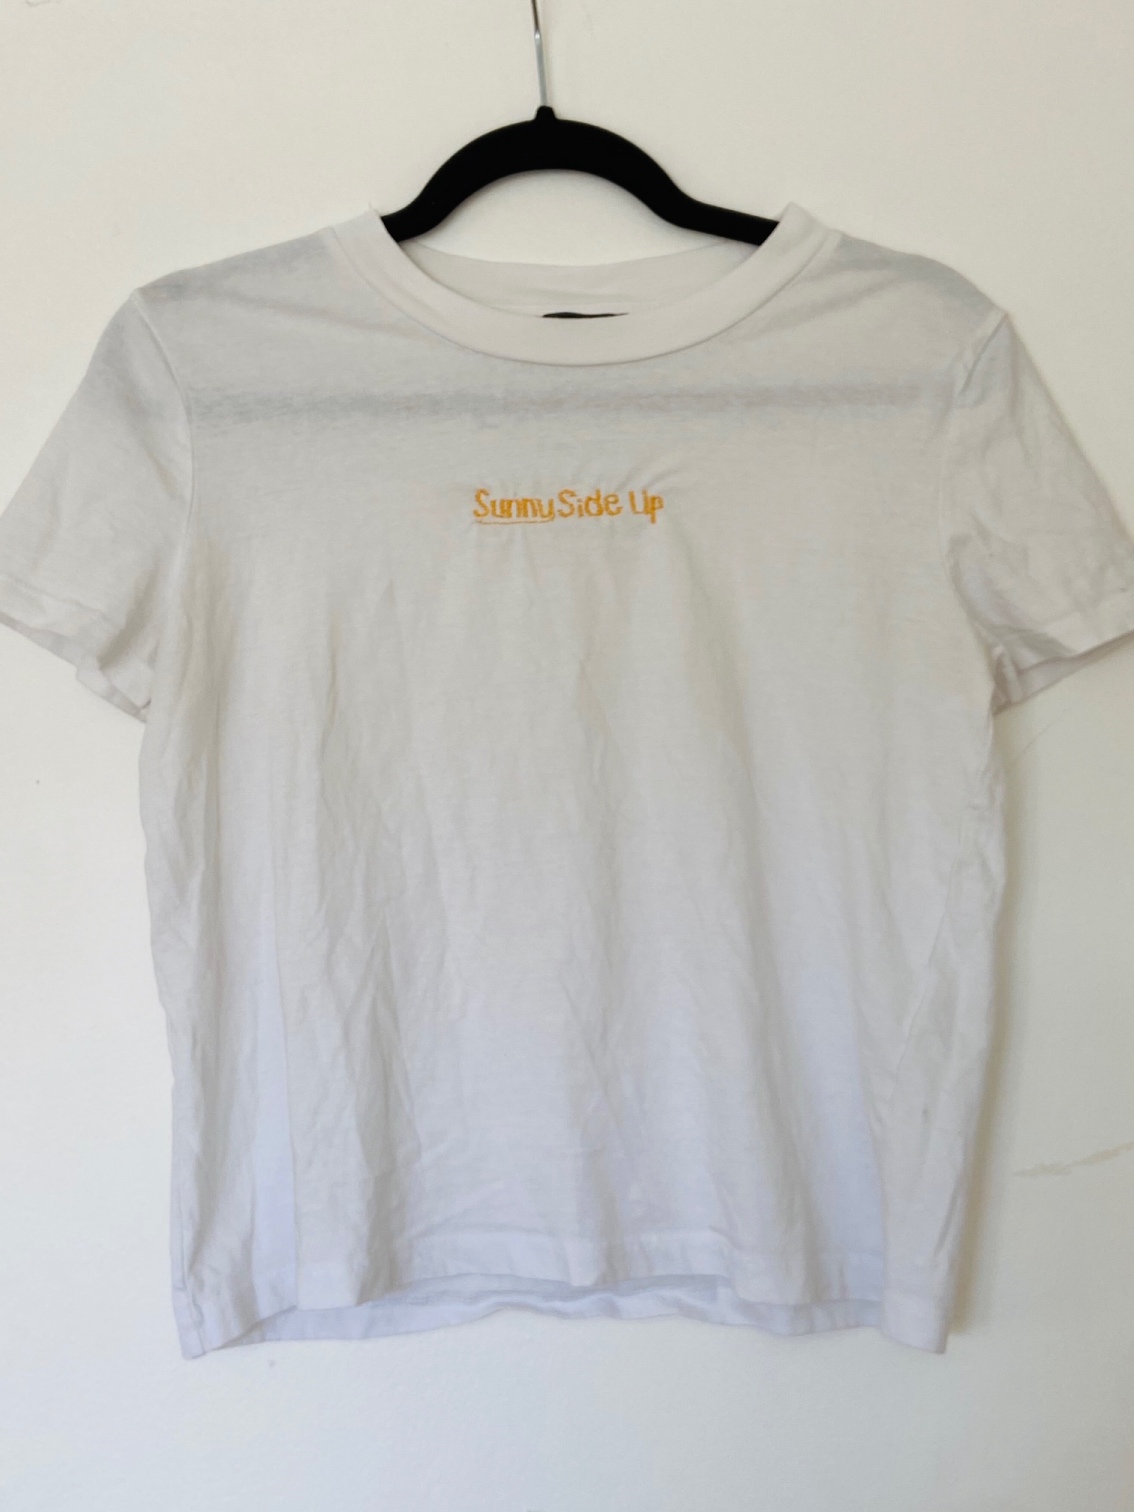 A white t-shirt on a hanger embroidered with the phrase 'Sunny Side Up'